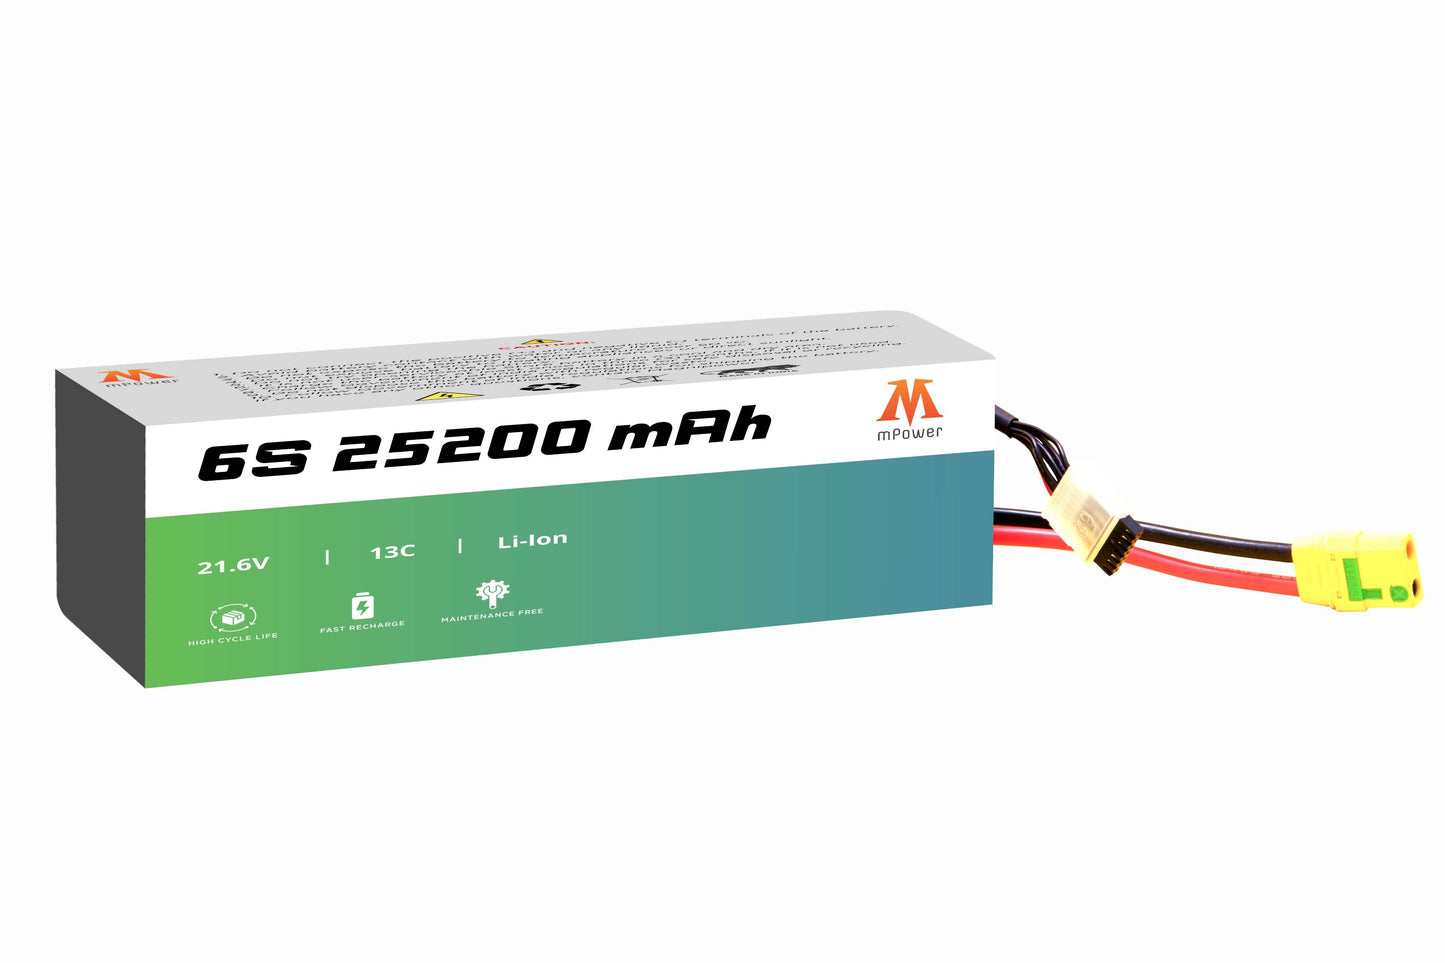 mPower 6S 25200mAh 13C Lithium-Ion Battery for Survey Drones